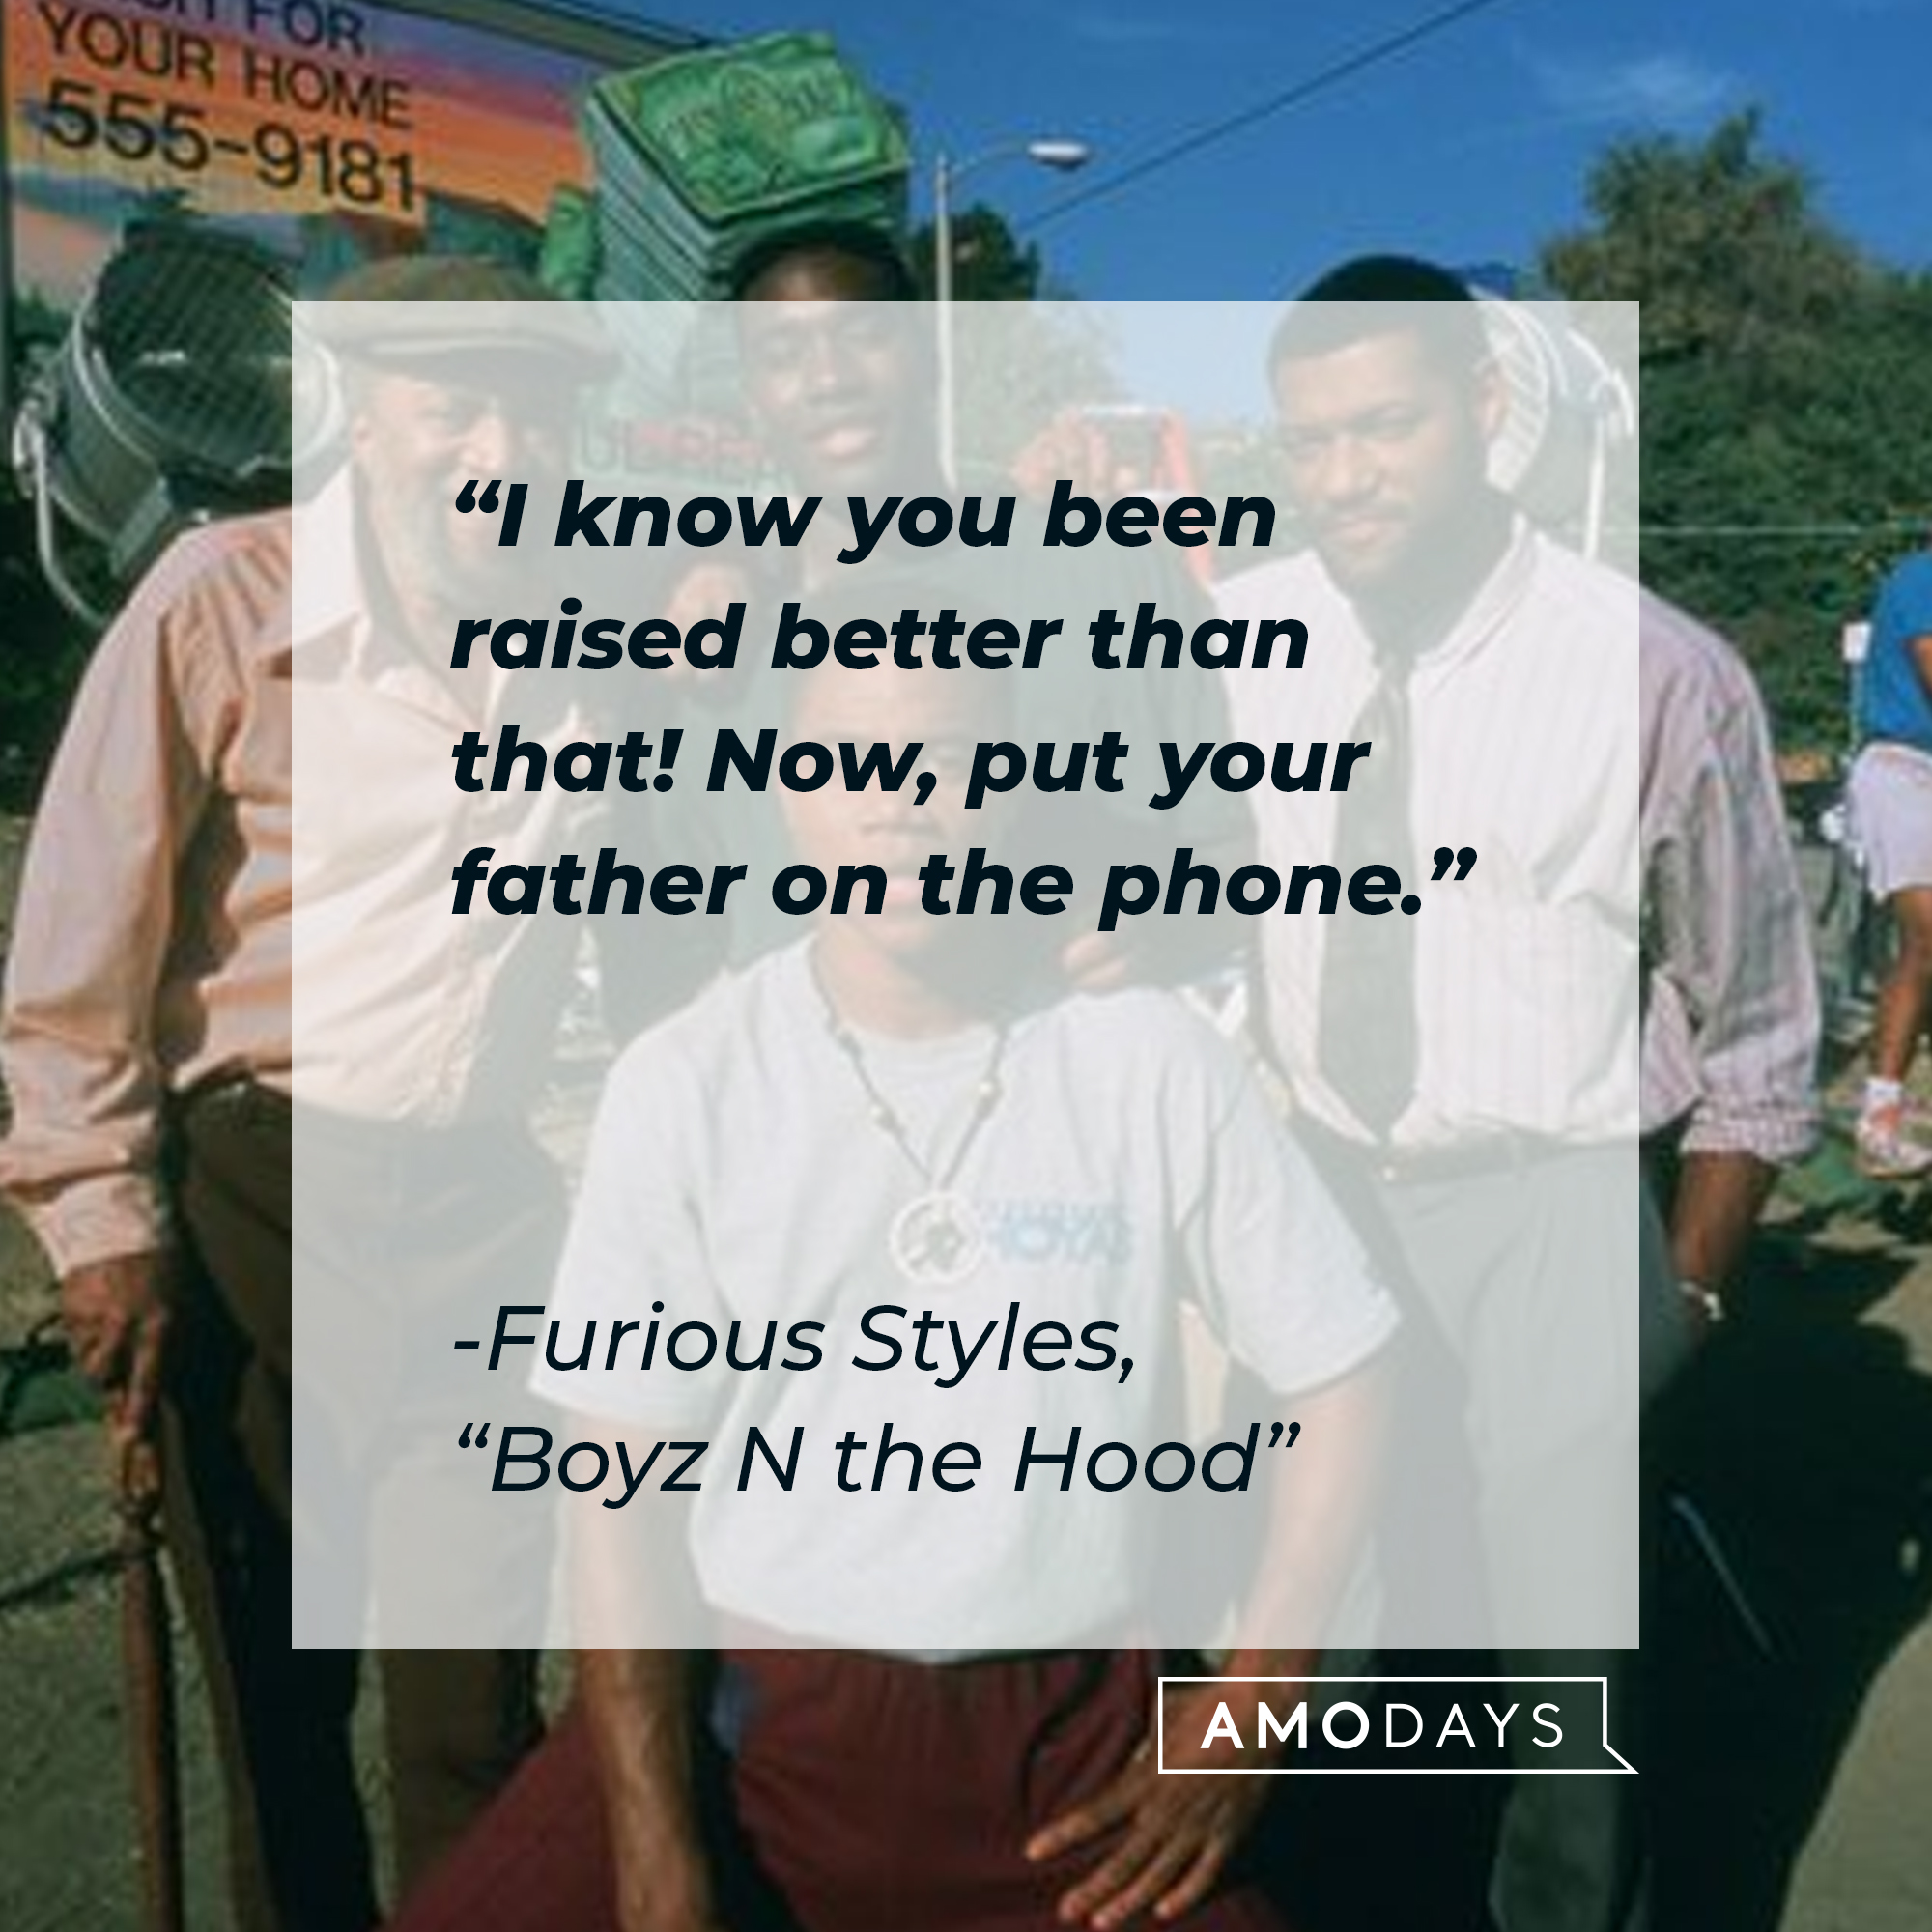 Furious Style's quote in "Boyz N the Hood:" "I know you been raised better than that! Now, put your father on the phone." | Source: Facebook.com/BoyzNtheHood